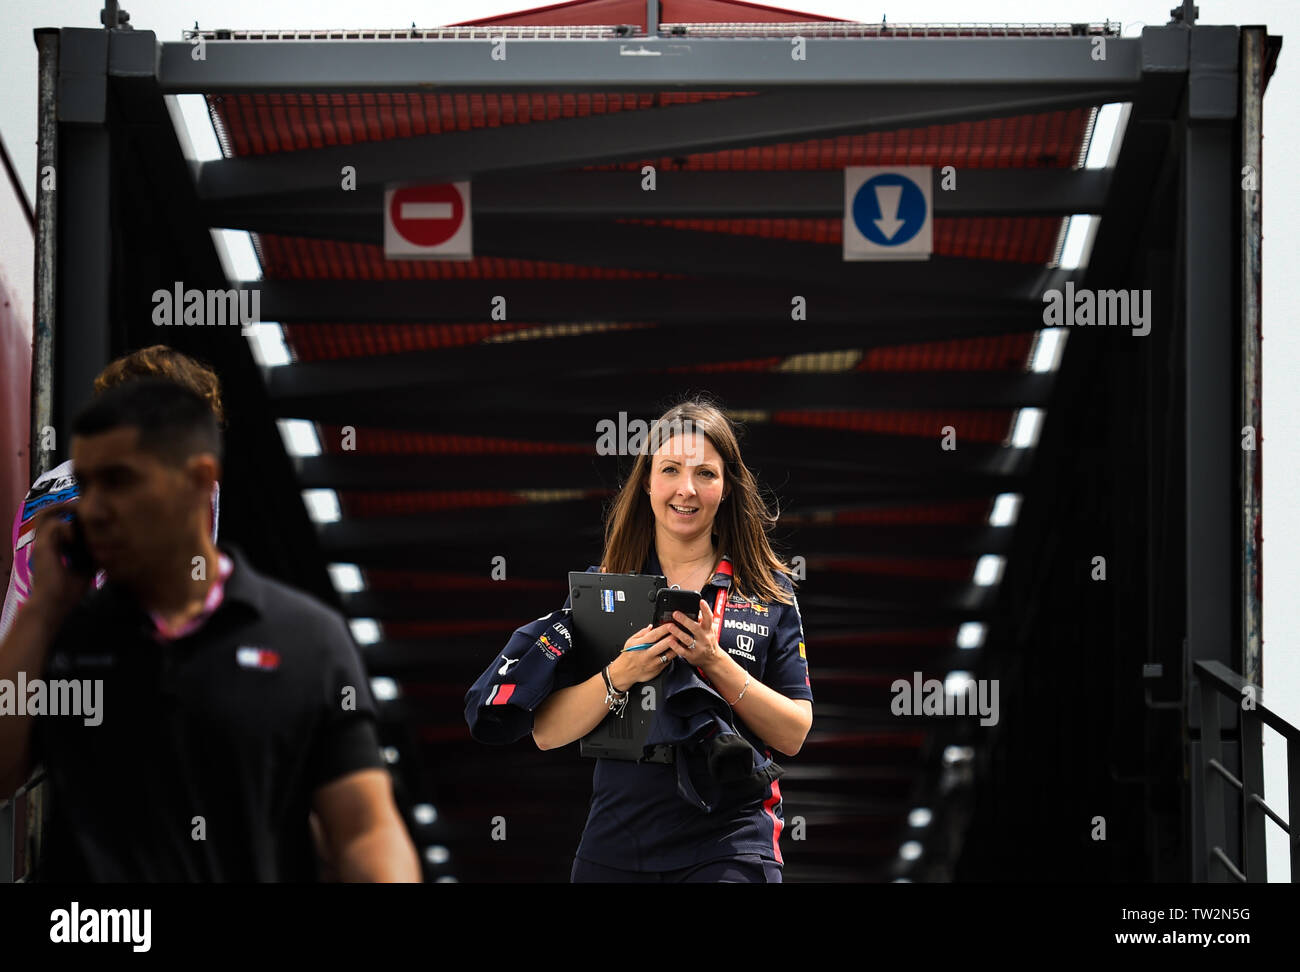 Monte Carlo/Monaco - 25/05/2019 - Victoria Lloyd, Senior Communications  Manager for Red Bull Racing Team in the paddock before the start of FP3  Stock Photo - Alamy